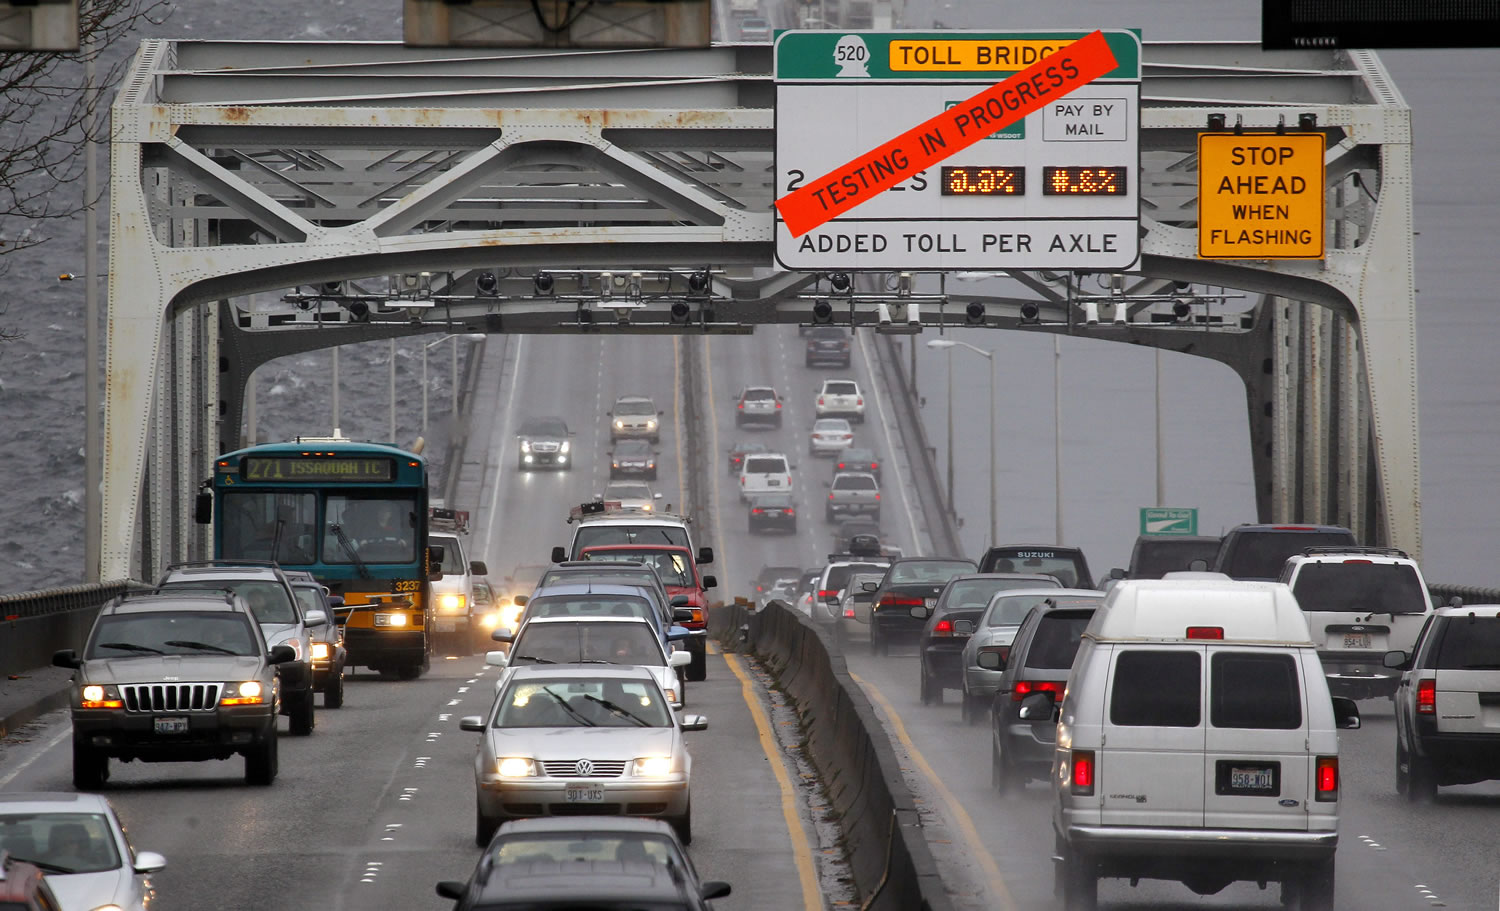 The Connecting Washington Task Force notes that the number of vehicle miles traveled each year in Washington is projected to reach 60 billion by 2020; annual freight volumes are expected to triple by 2035.